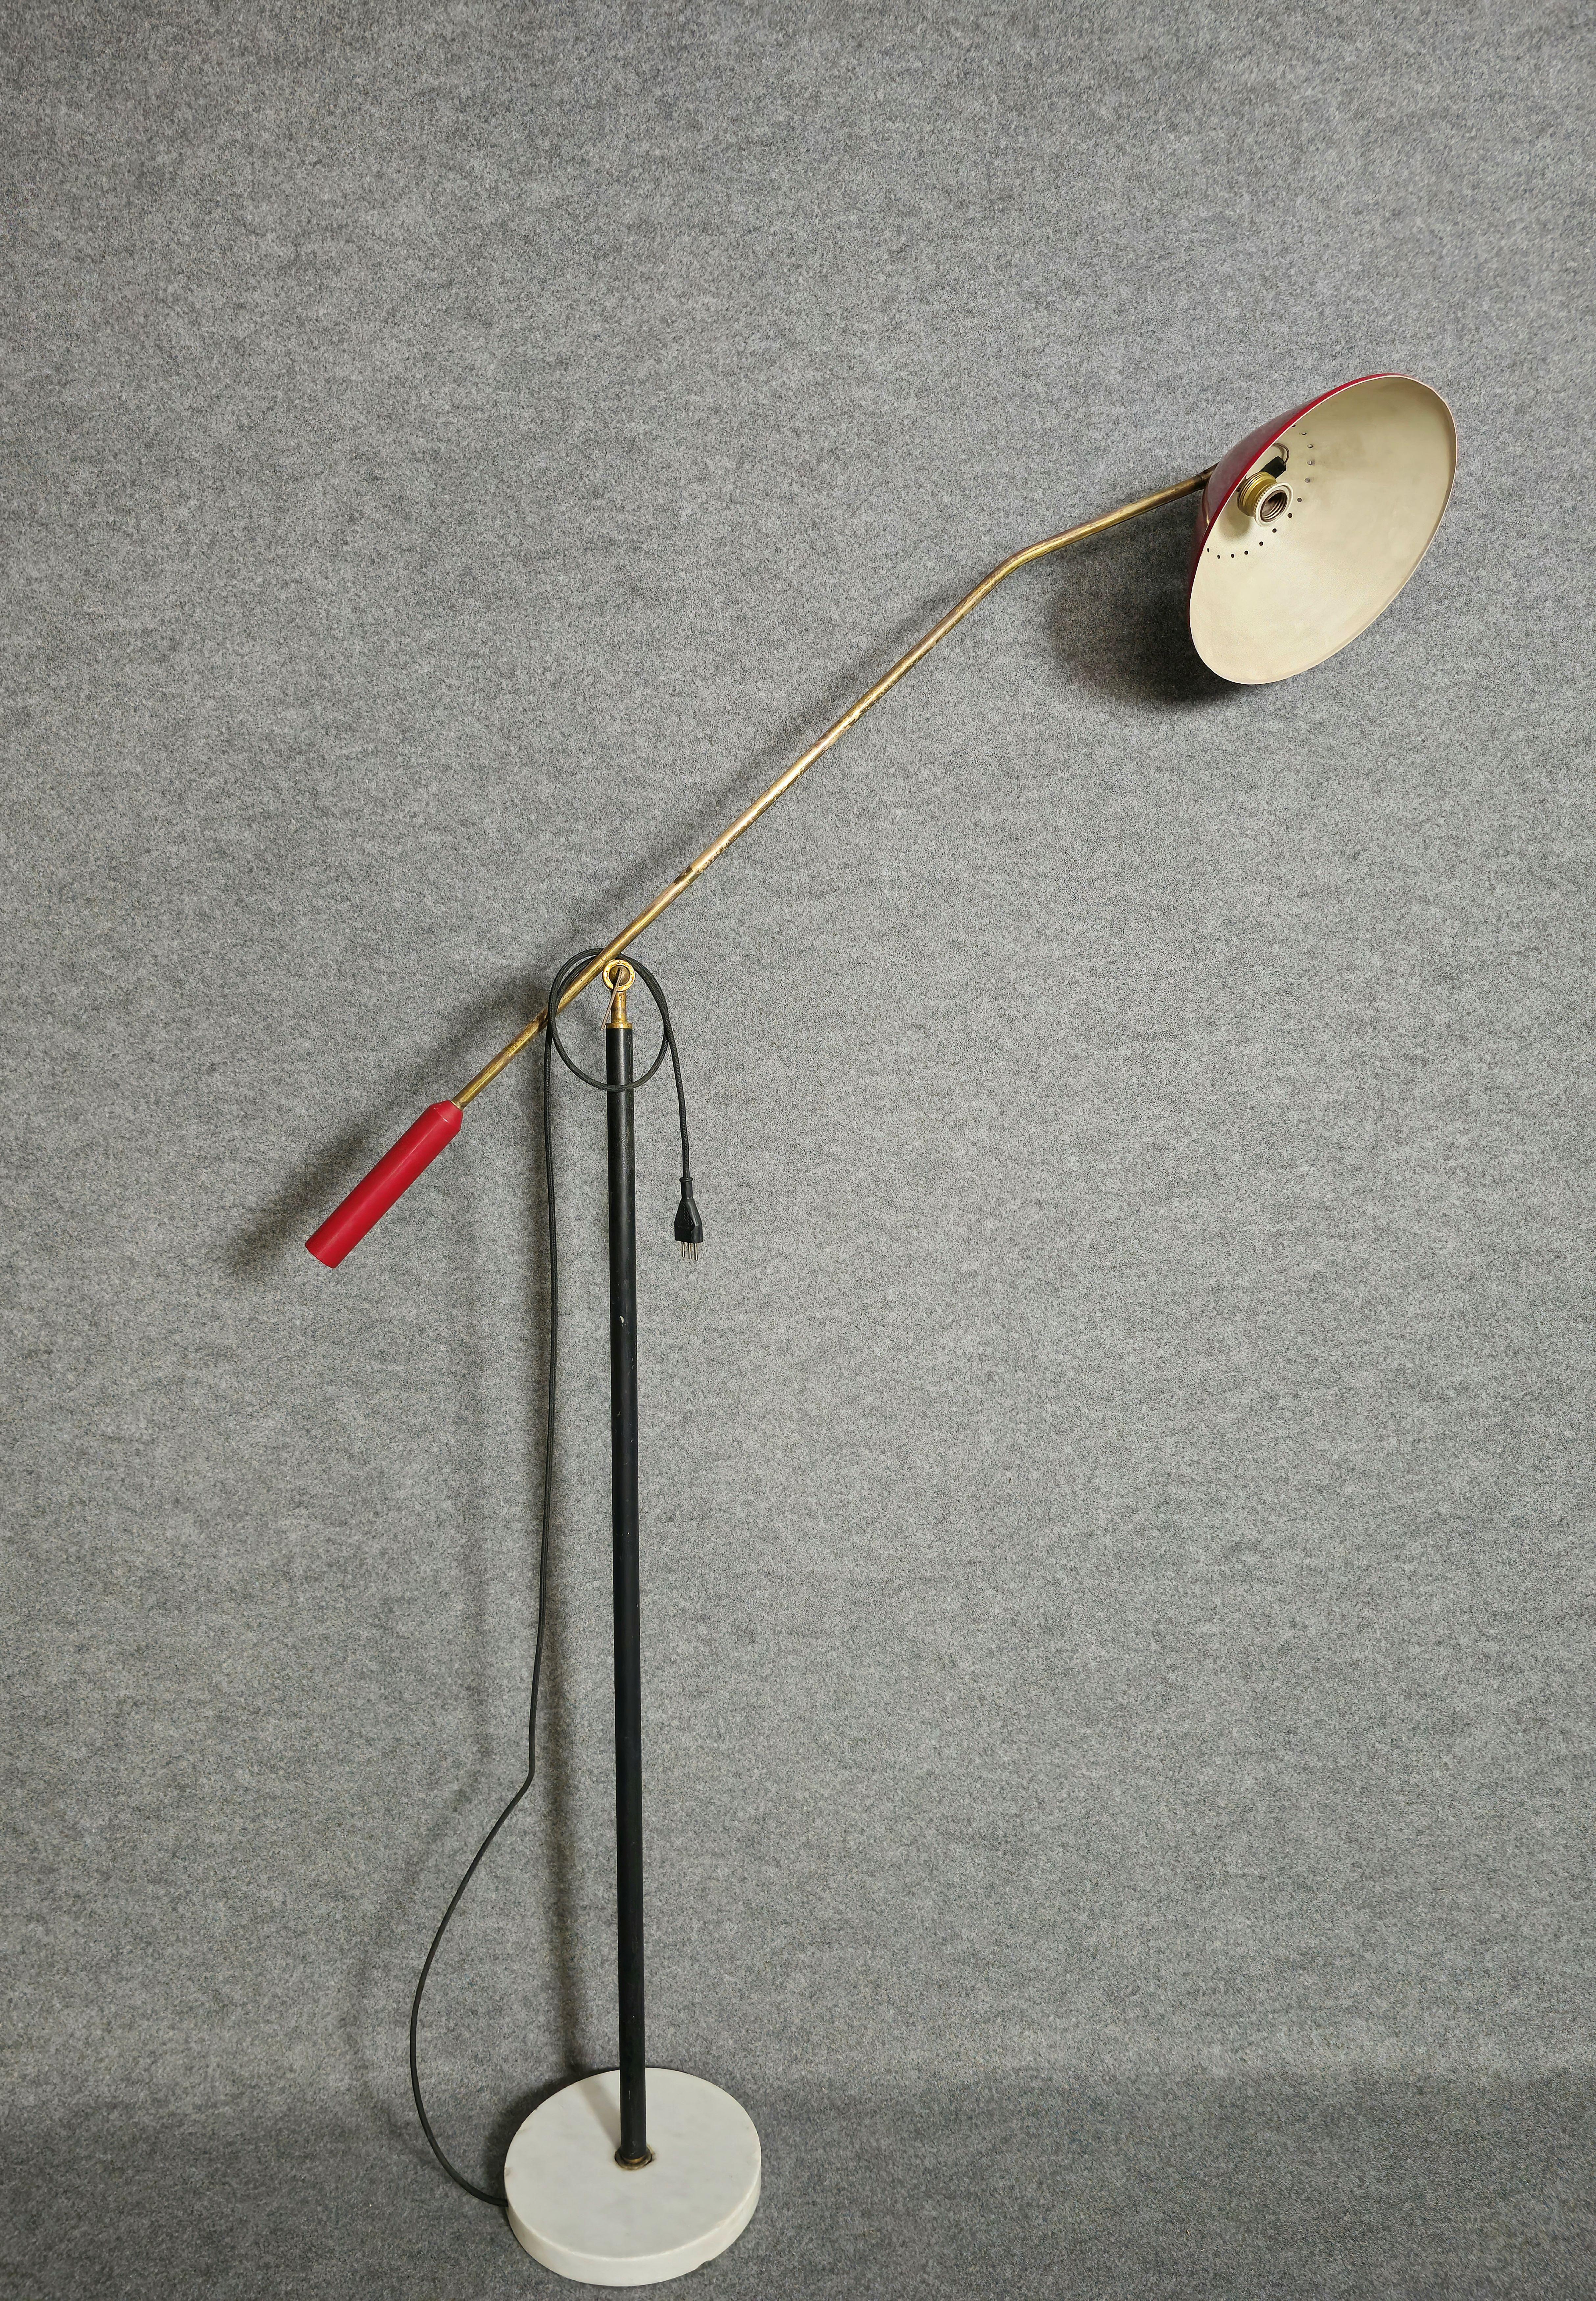 Adjustable floor lamp by Stilnovo, 1950s. Circular marble base. Black enamelled brass stem. A brass joint allows the arm to adjust in height. Brass arm with red counterweight and red enamelled lampshade. Thanks to a joint, the lampshade can also be